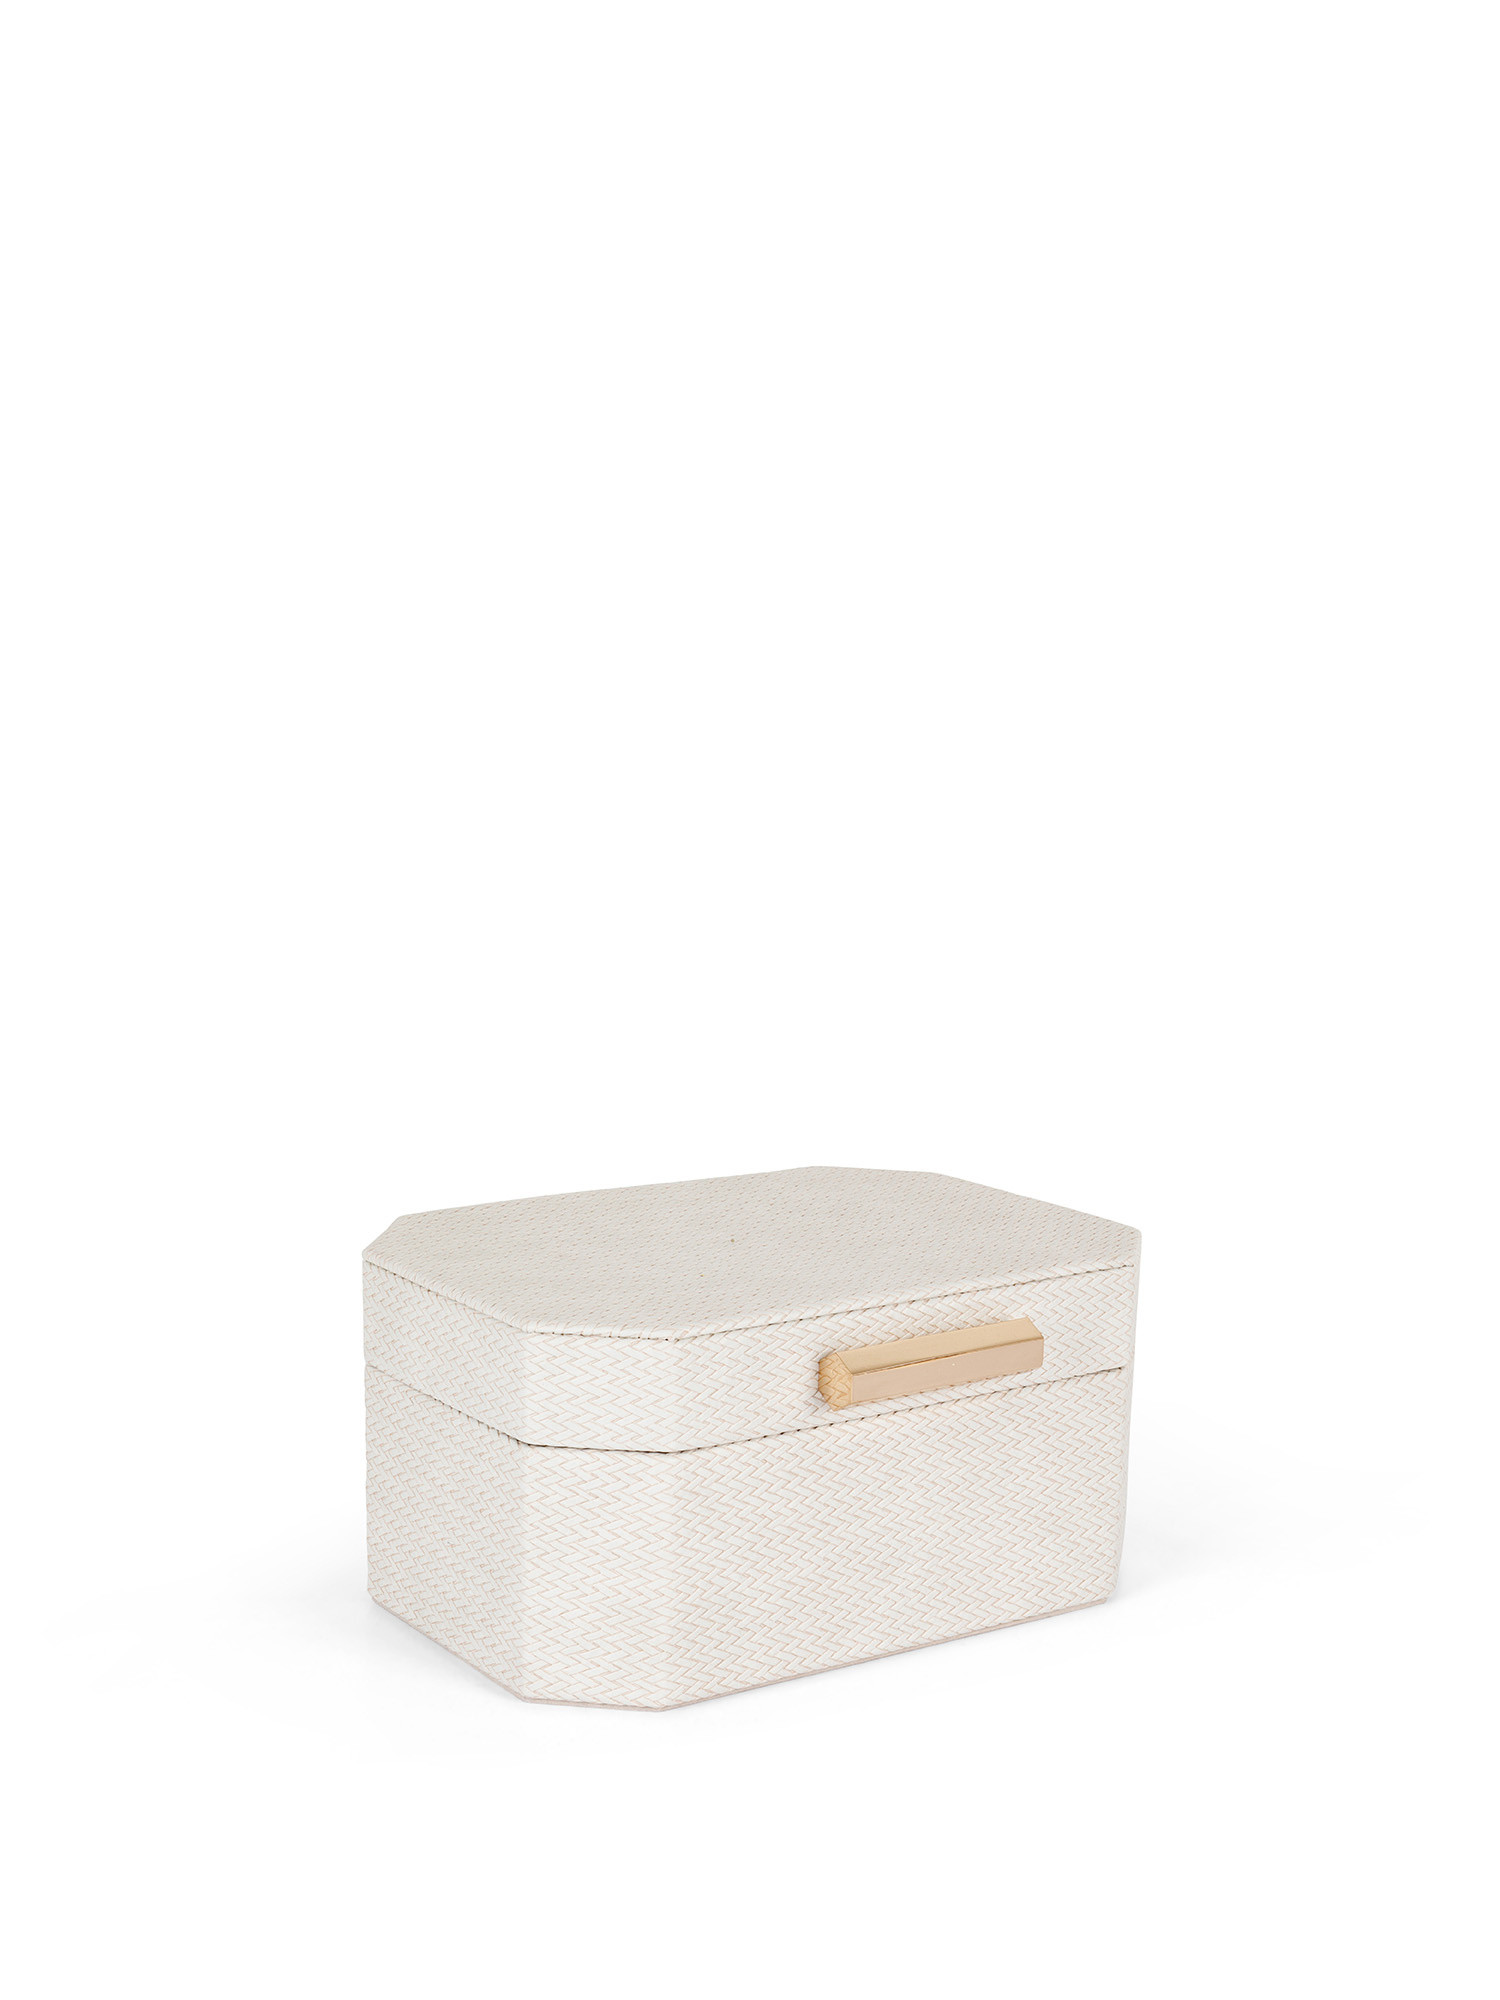 Jewelery box with golden closure, Ivory, large image number 0